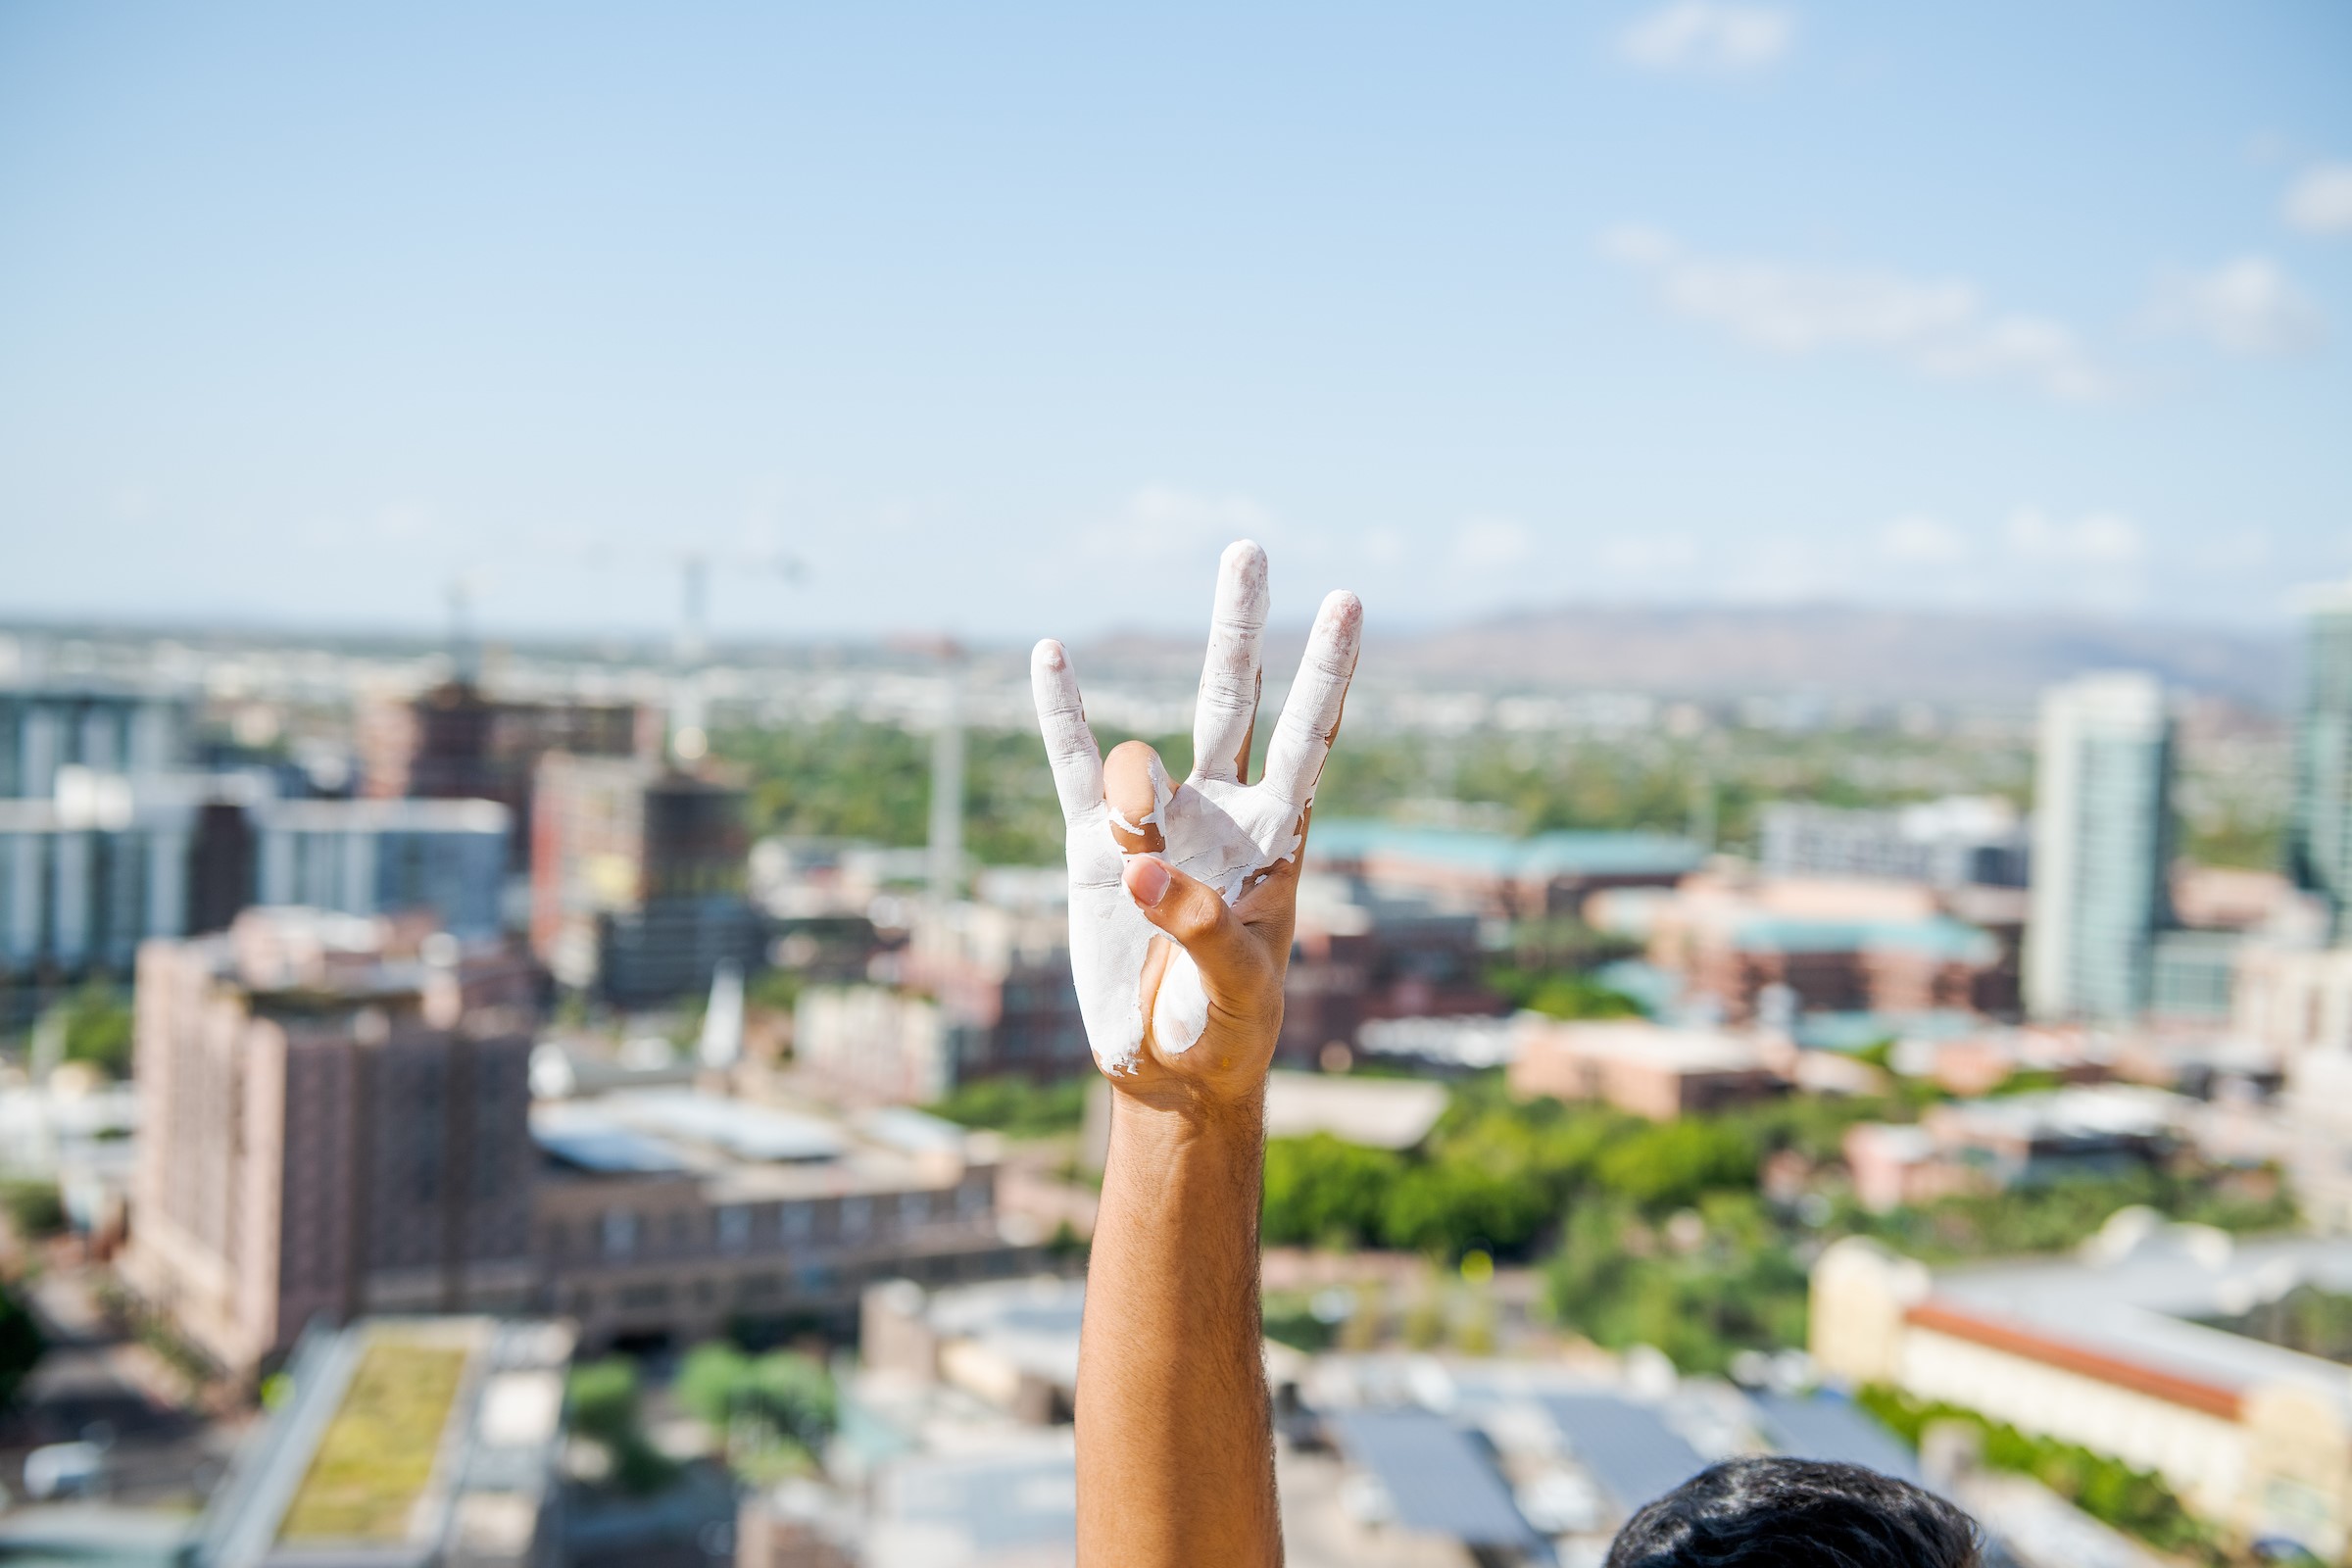 A painted hand makes the pitchfork salute at ASU's 2019 "Echo from the Buttes" event / Photo by Jared Opperman/ASU